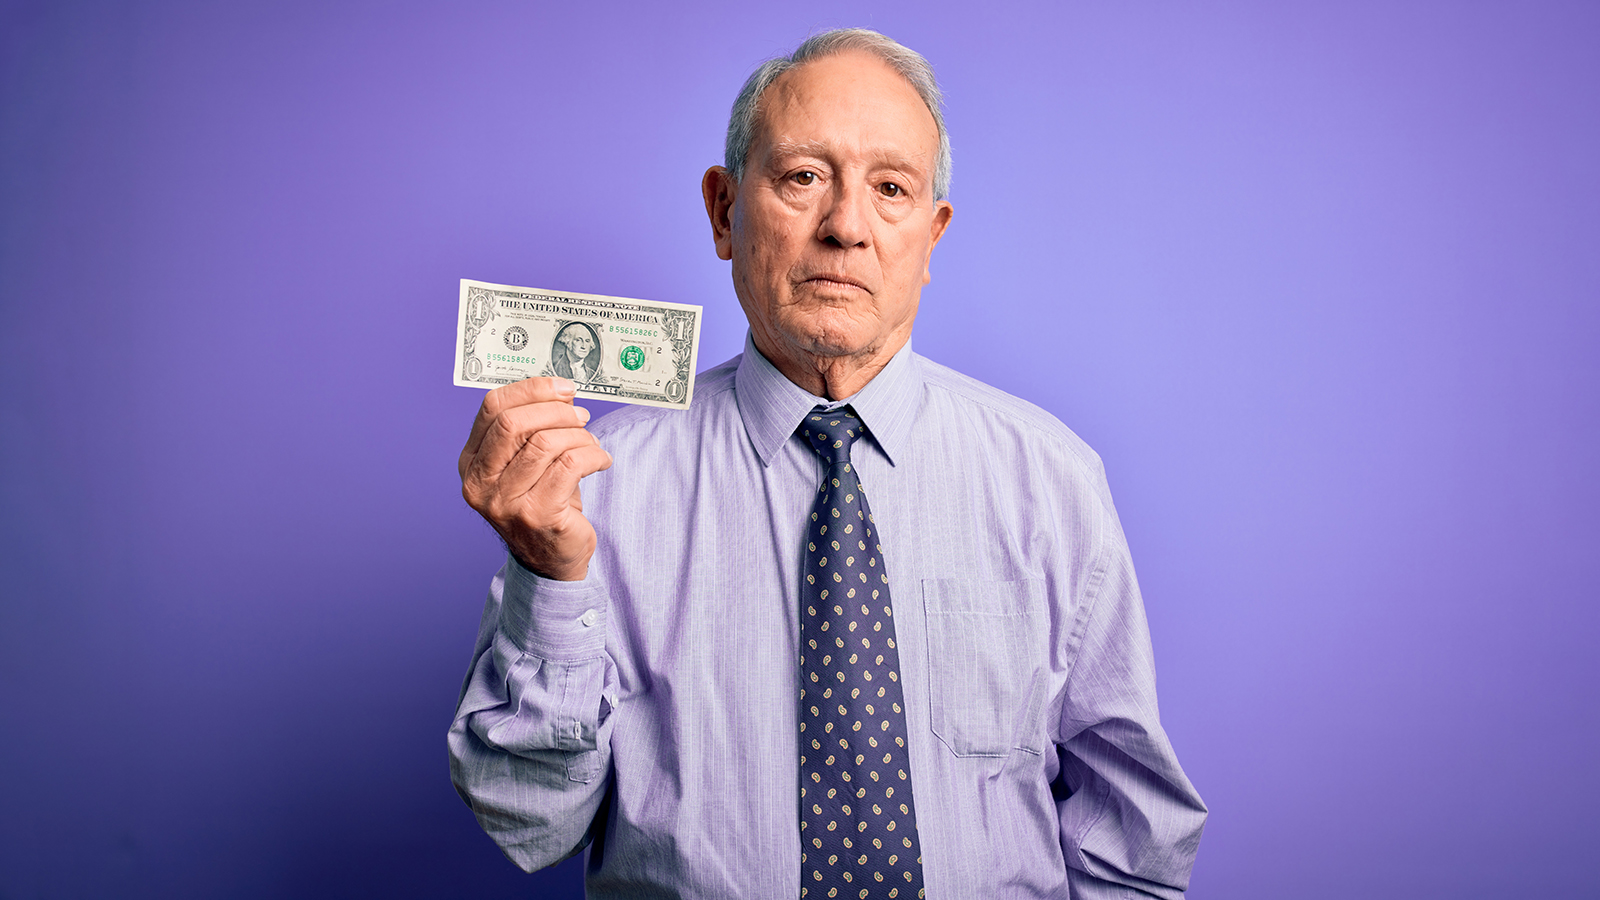 Senior grey haired man holding one dollar bank note over purple background with a confident expression on smart face thinking serious